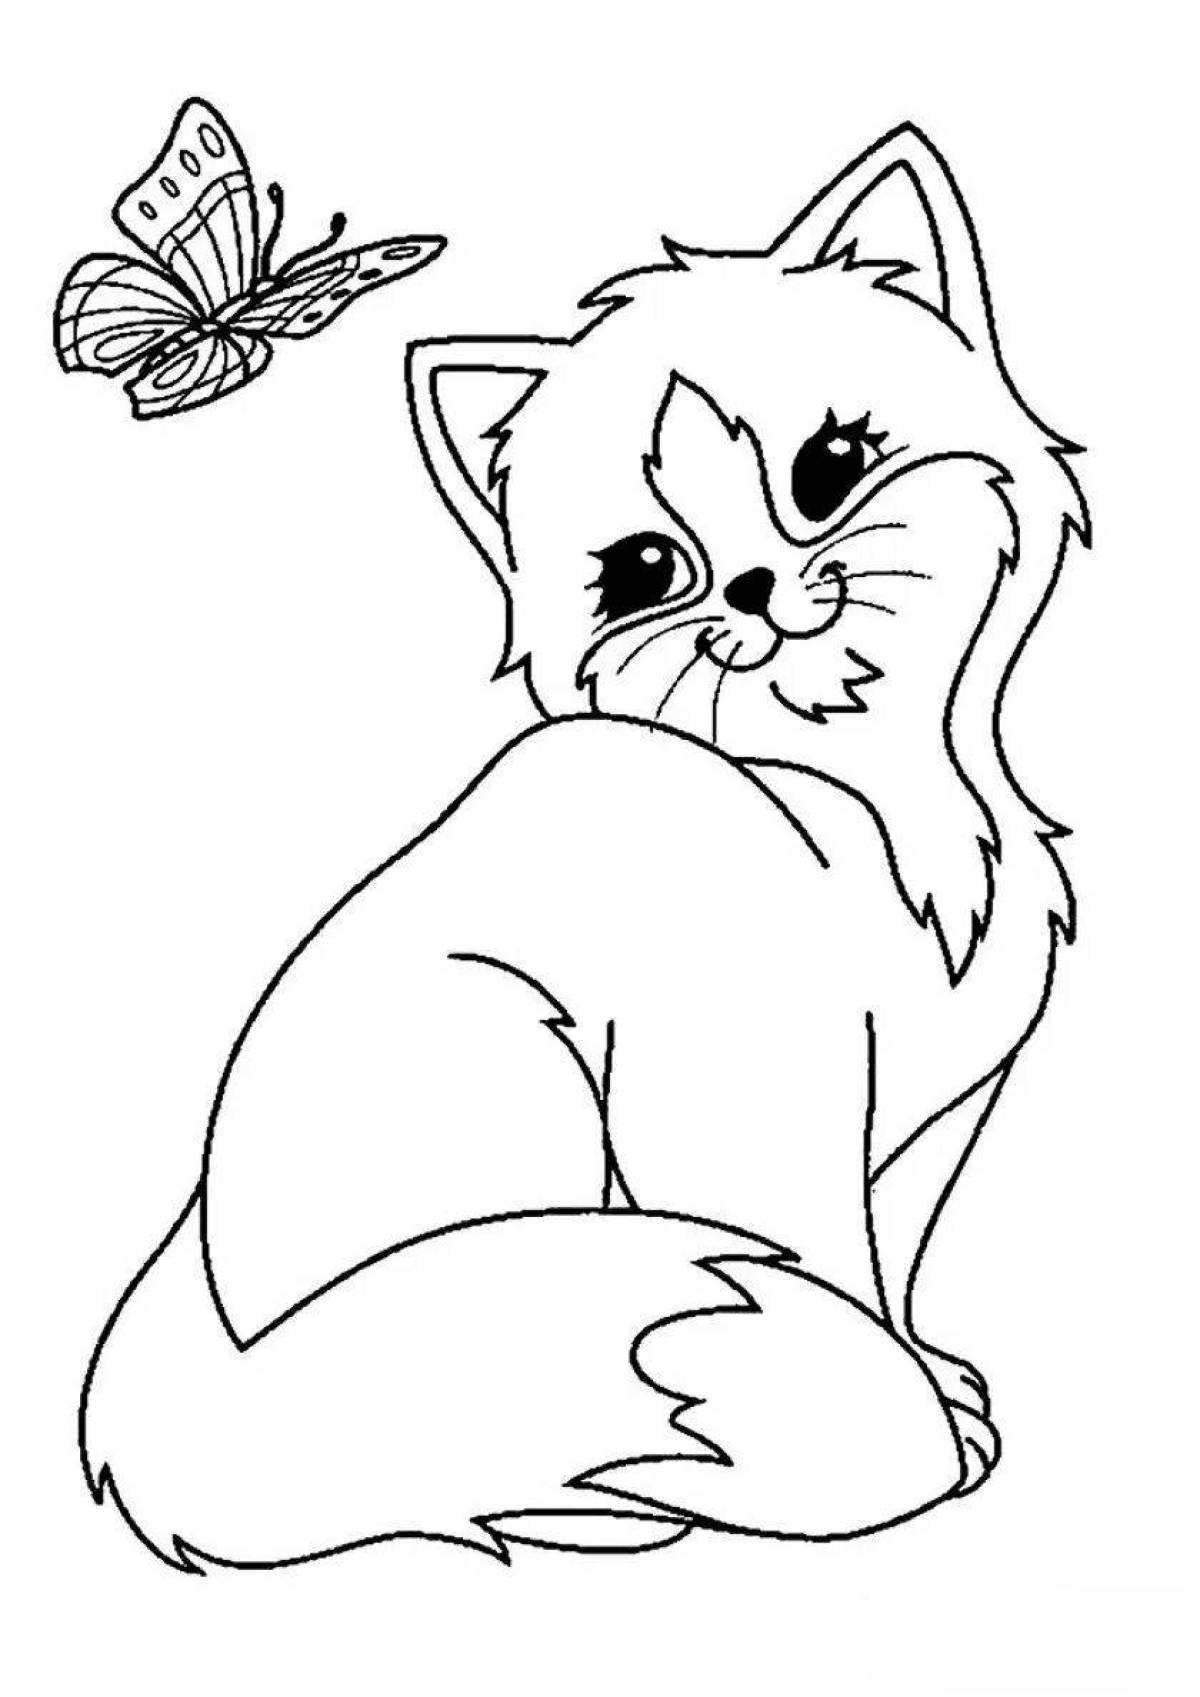 Fuzzy printing print coloring page